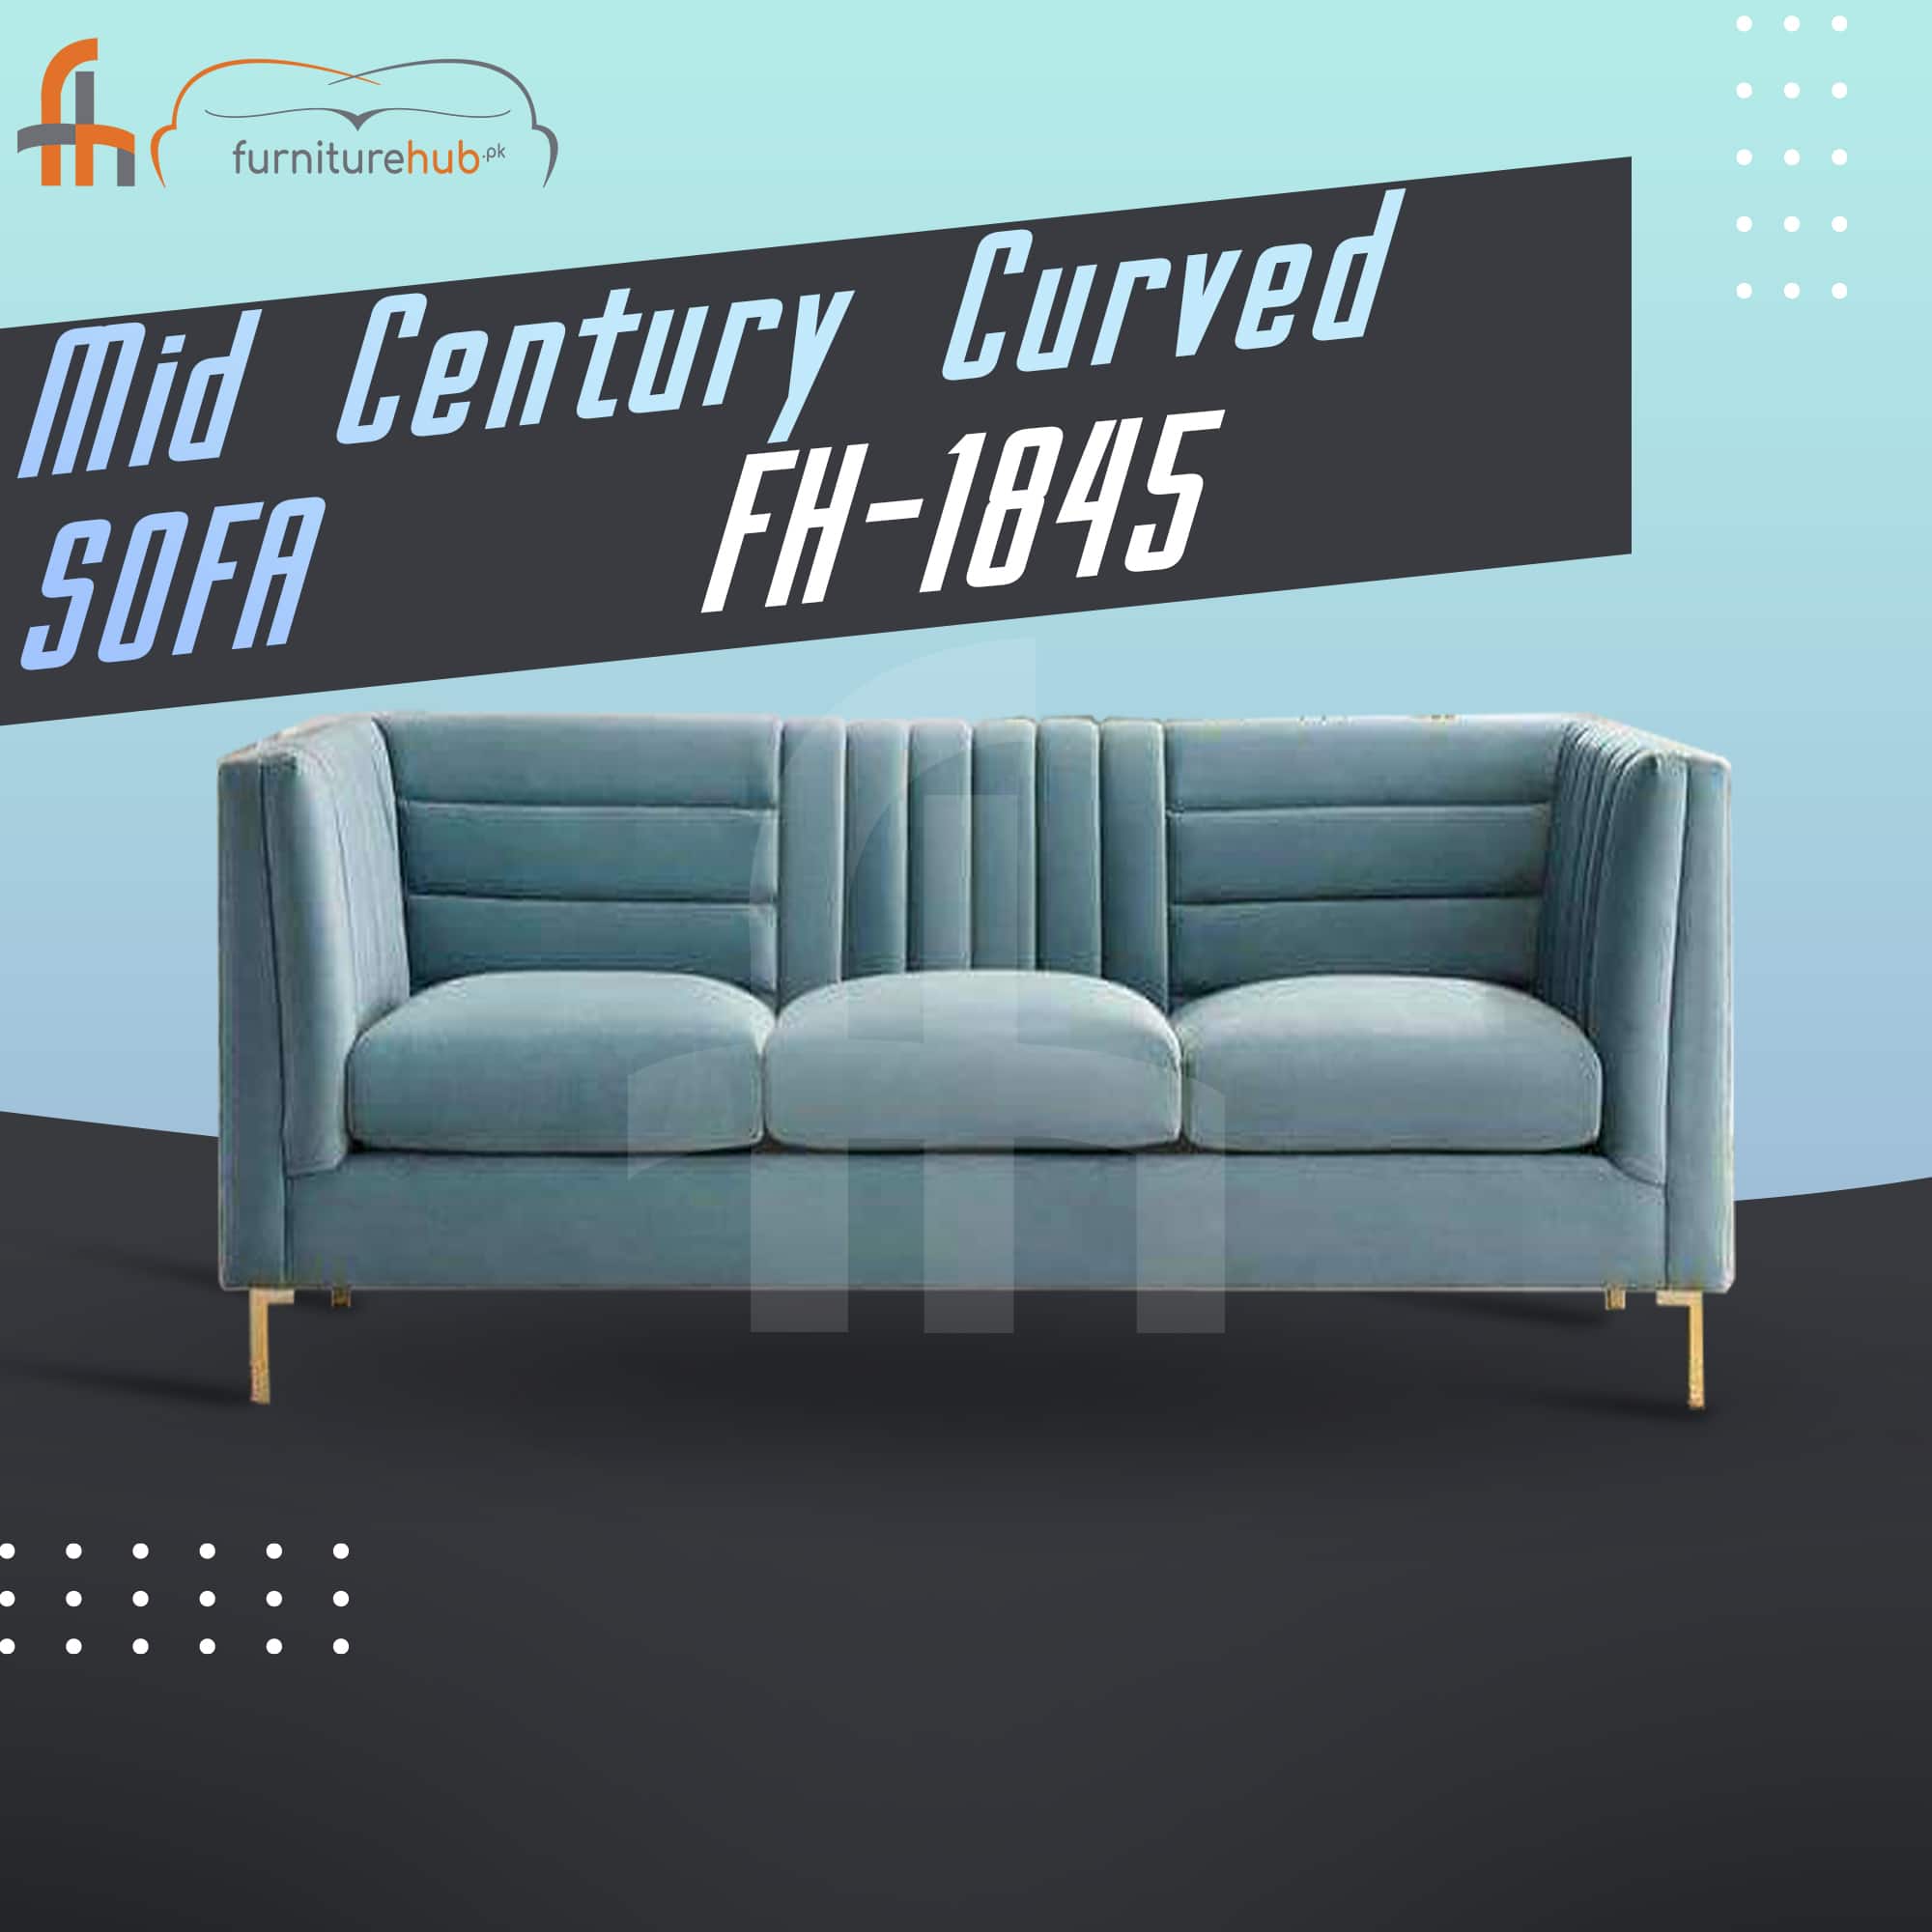 Modern Style Couches (FH-1845)